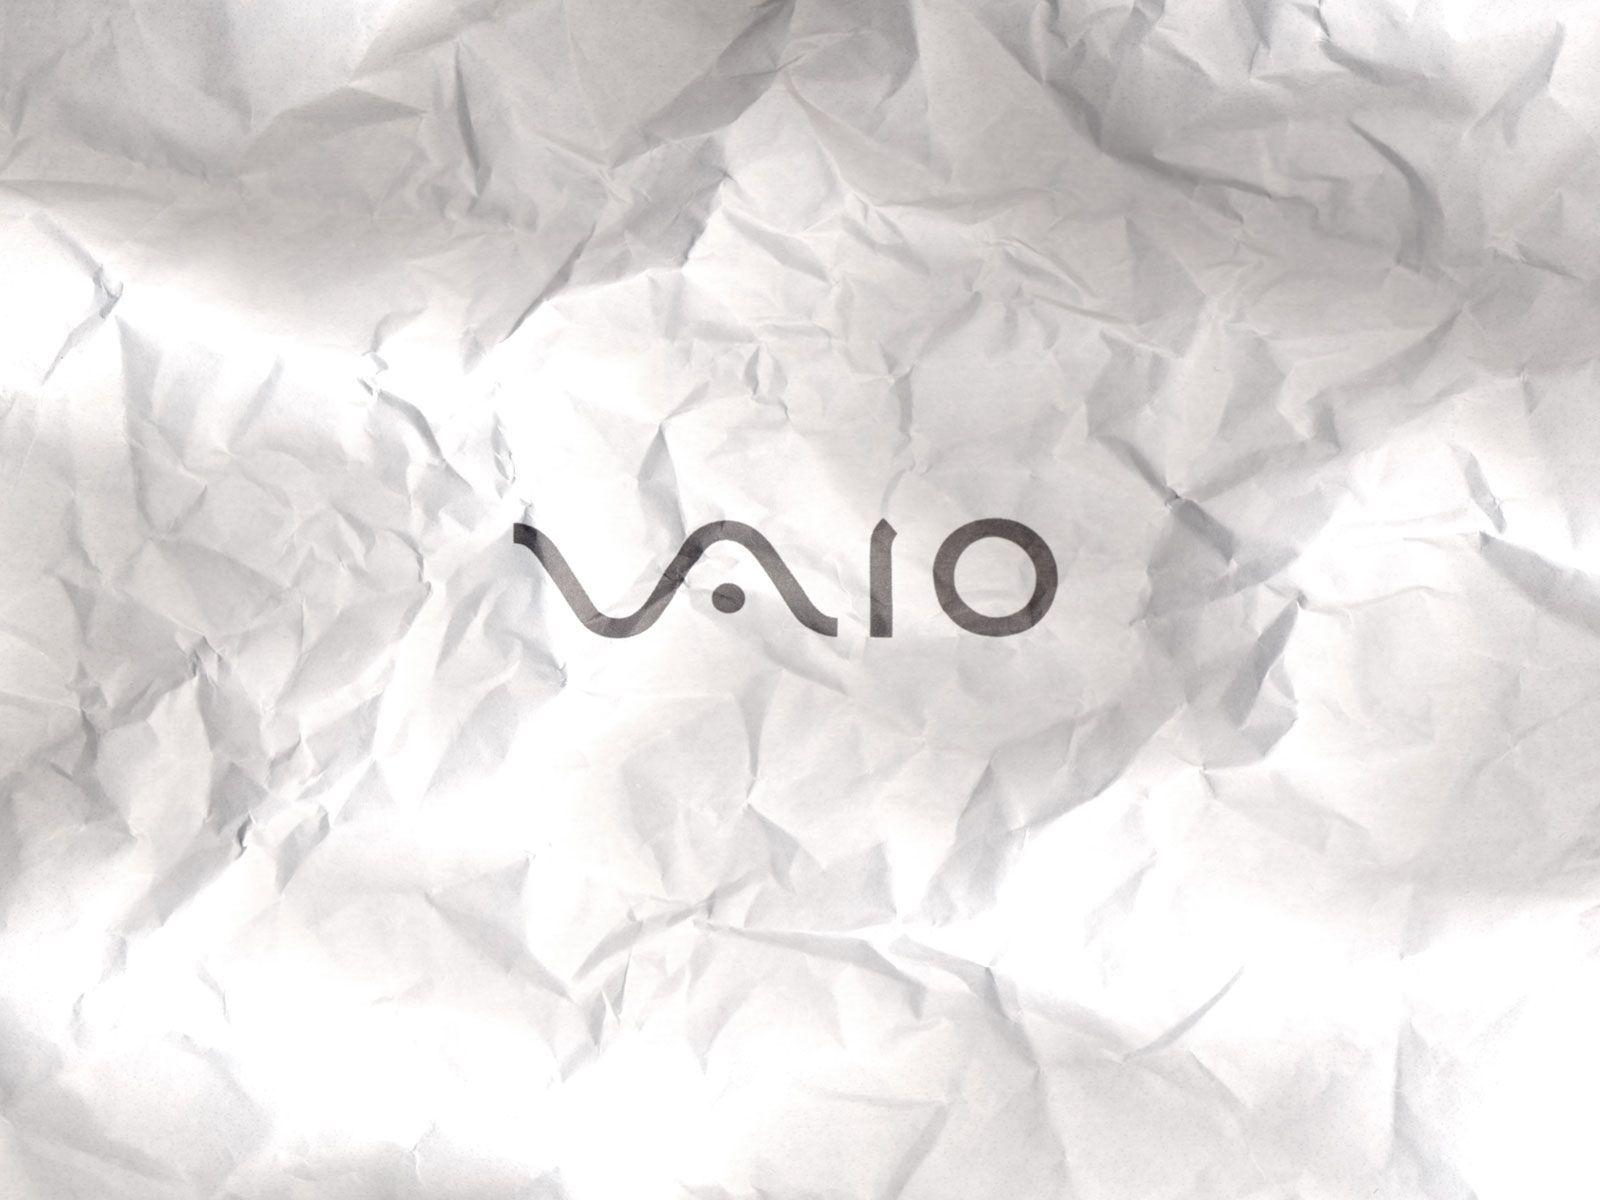 HD Sony Vaio Wallpaper & Vaio Background For Free Download